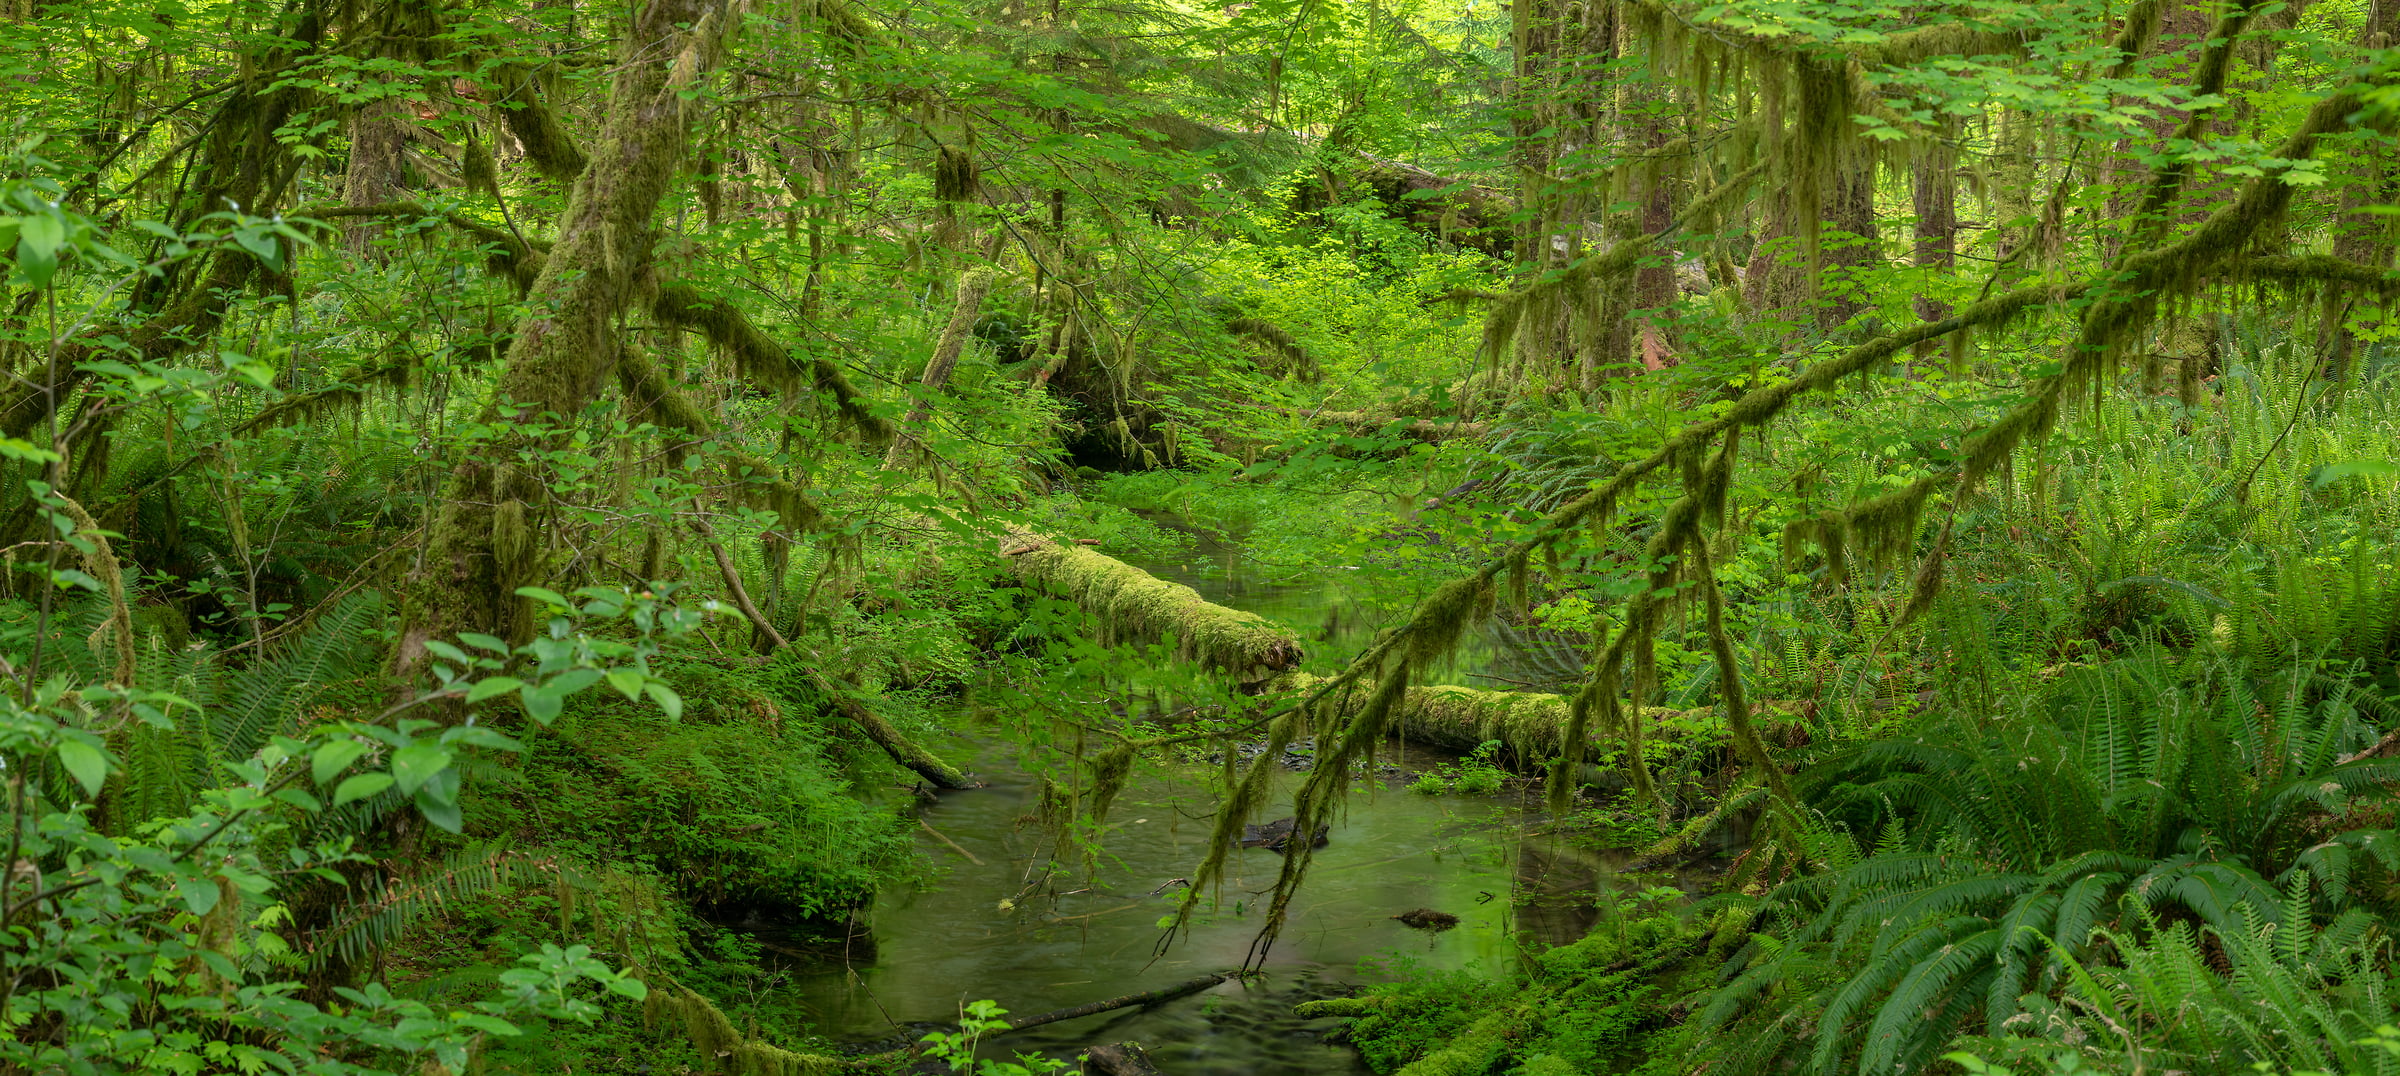 238 megapixels! A very high resolution, large-format VAST photo print of a lush green jungle; nature photograph created by Greg Probst in Hoh Rainforest, Olympic National Park, Washington.